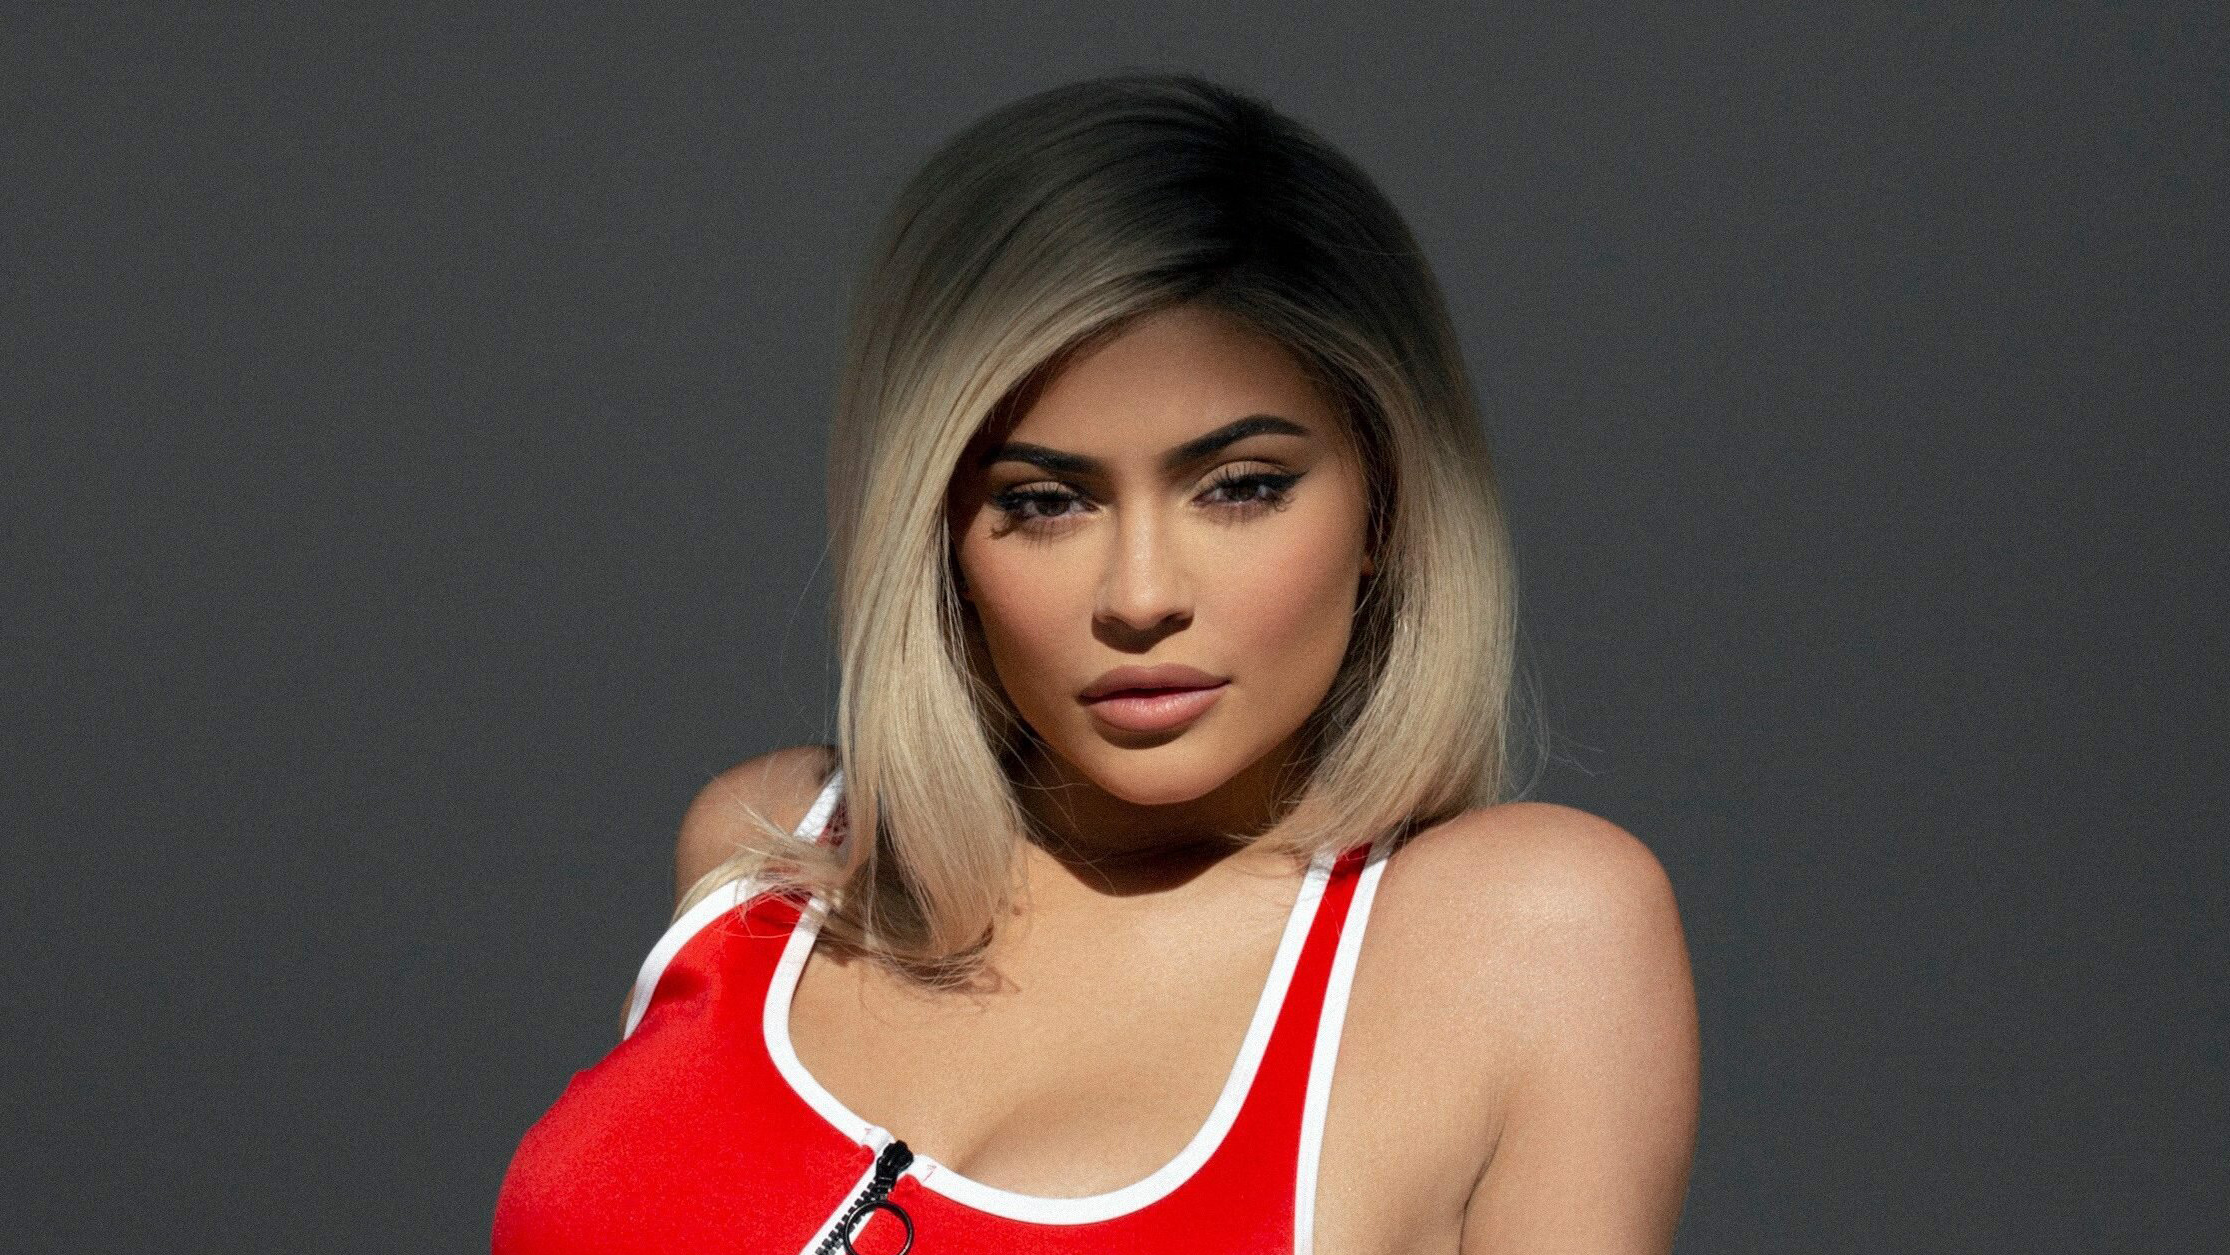 Kylie Jenner 2019 New HD Celebrities 4k Wallpapers Images Backgrounds  Photos and Pictures